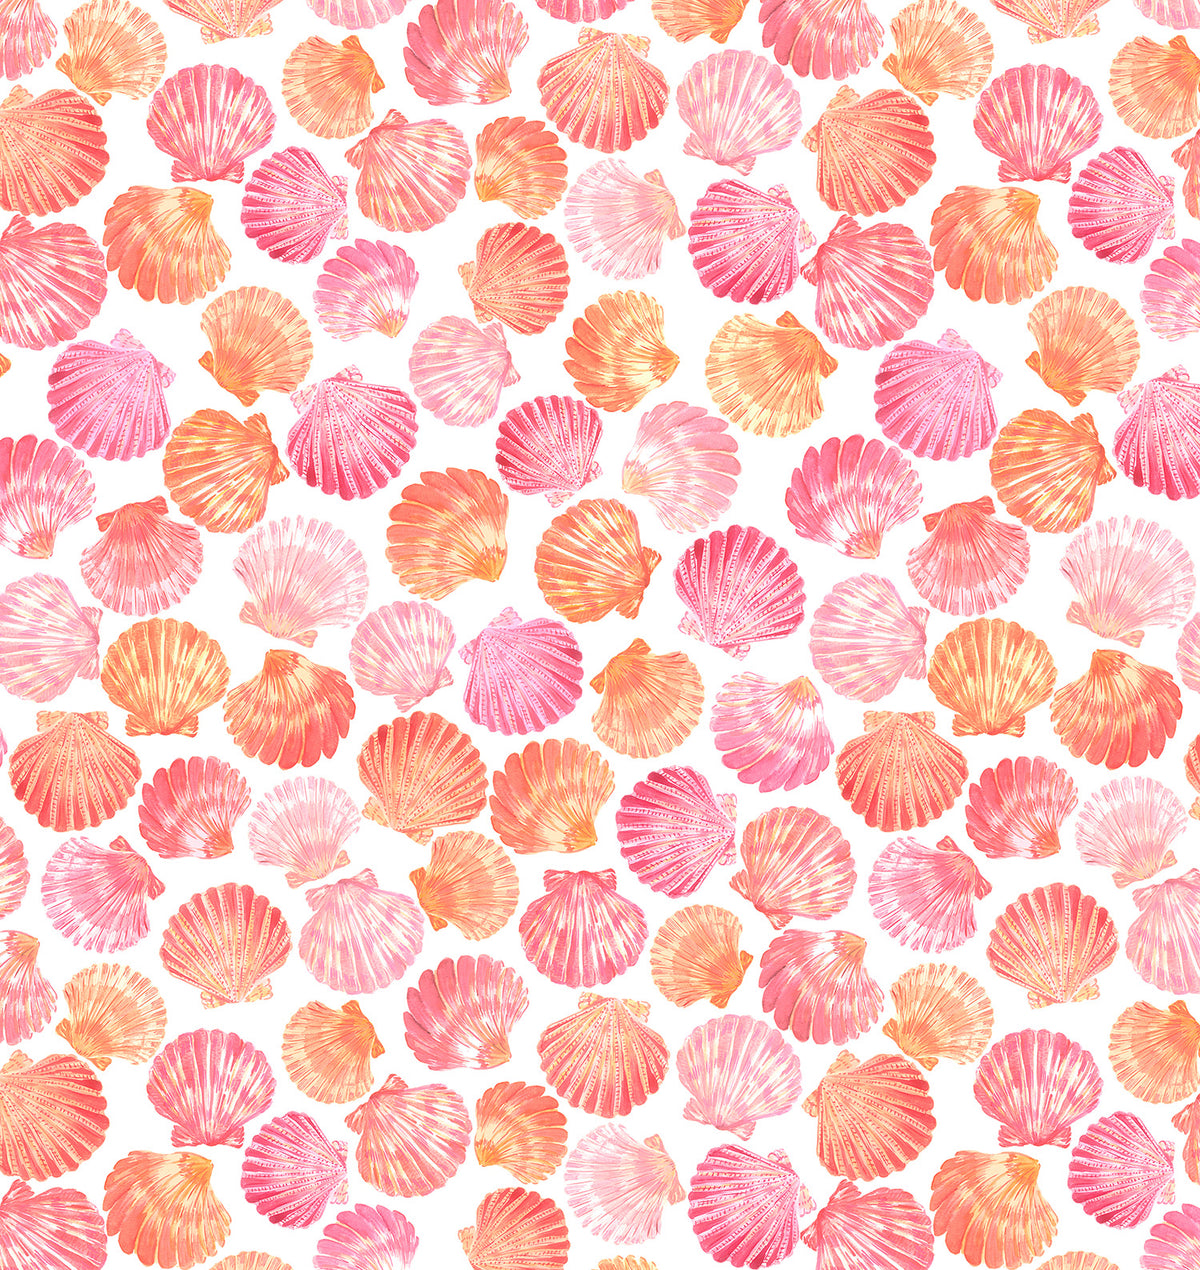 Swim Systems Sanibel seashell print, made from recycled fabric